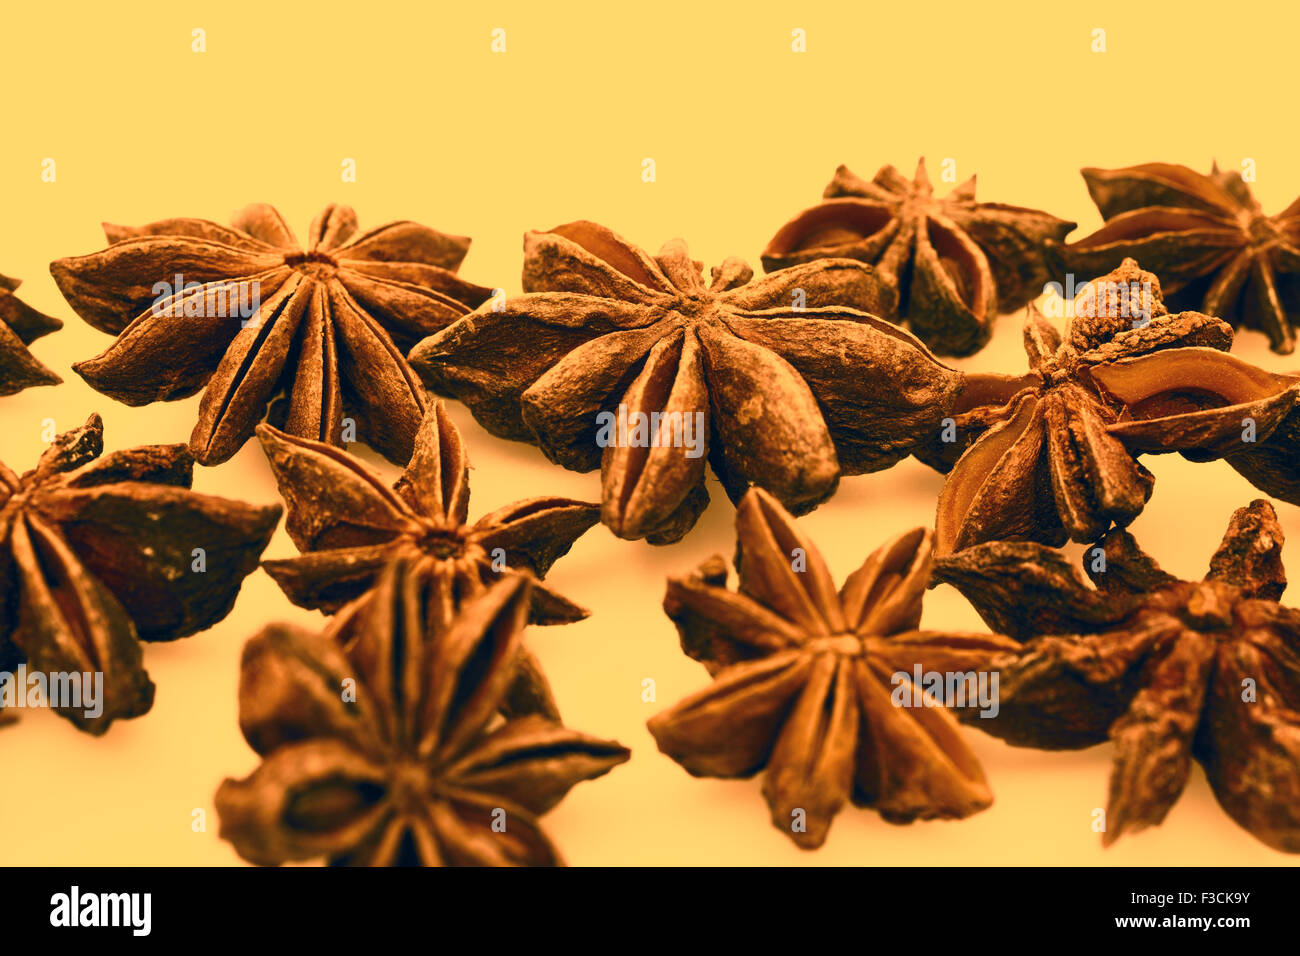 Anise stars on a white background Stock Photo